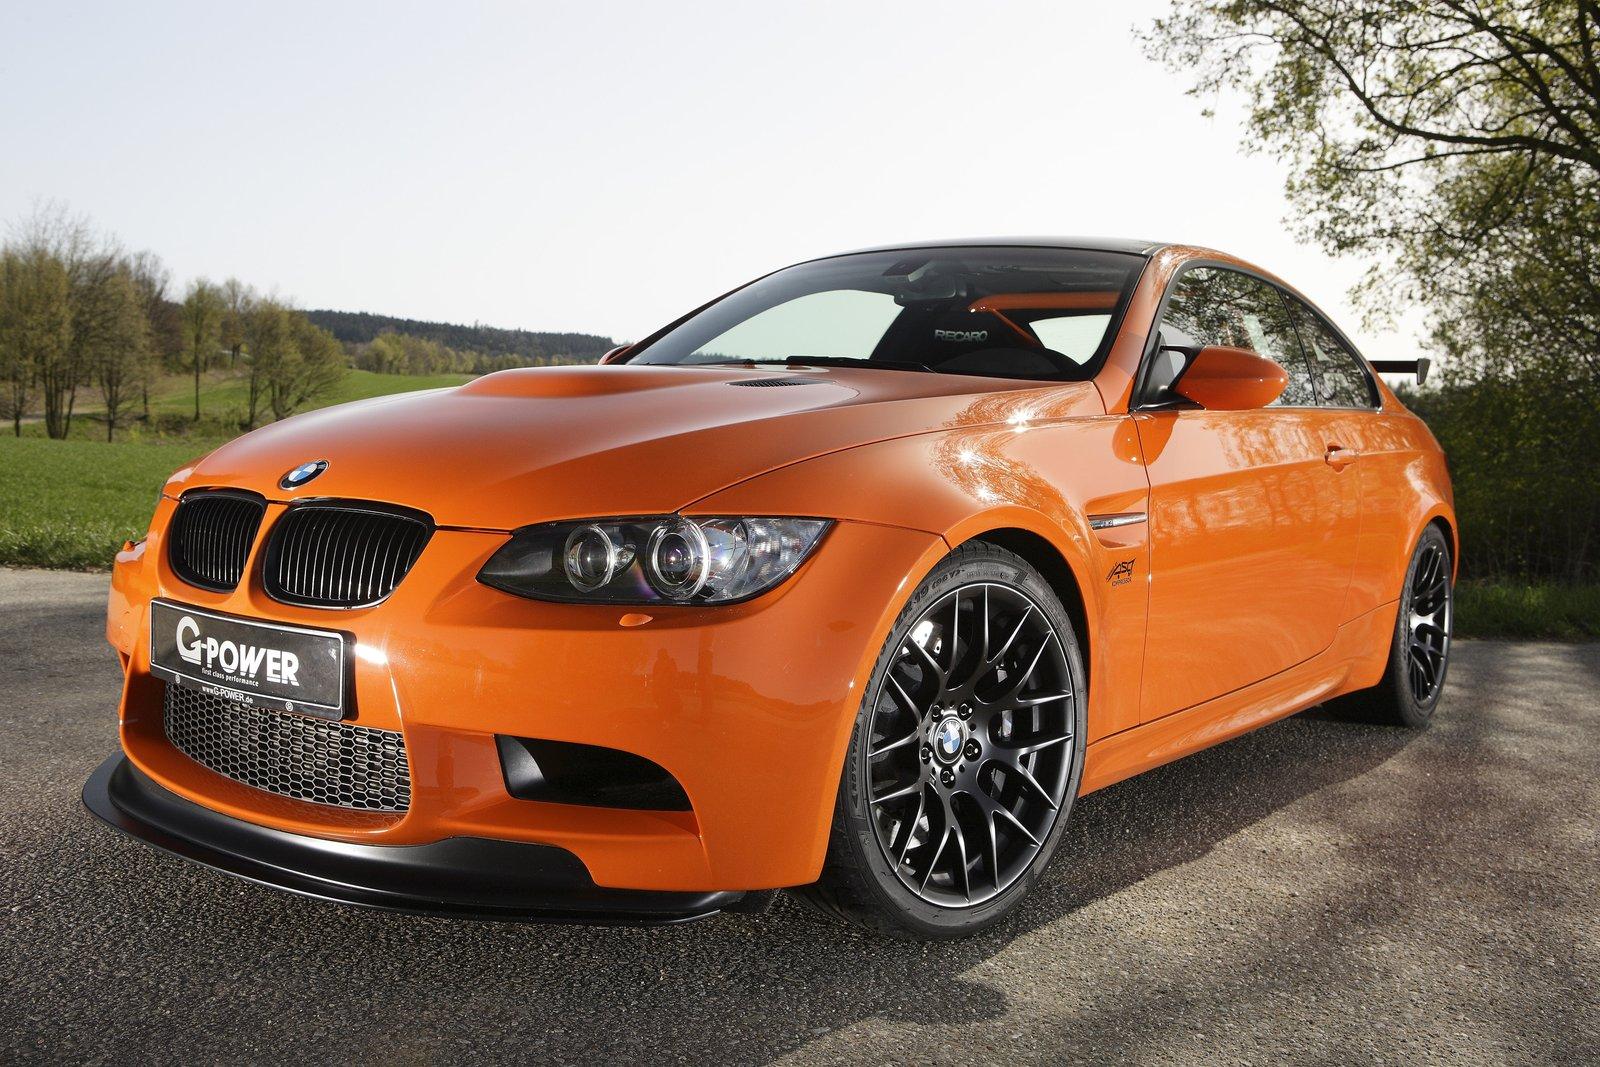 G-Power releases full details on the BMW M3 GTS tuning package